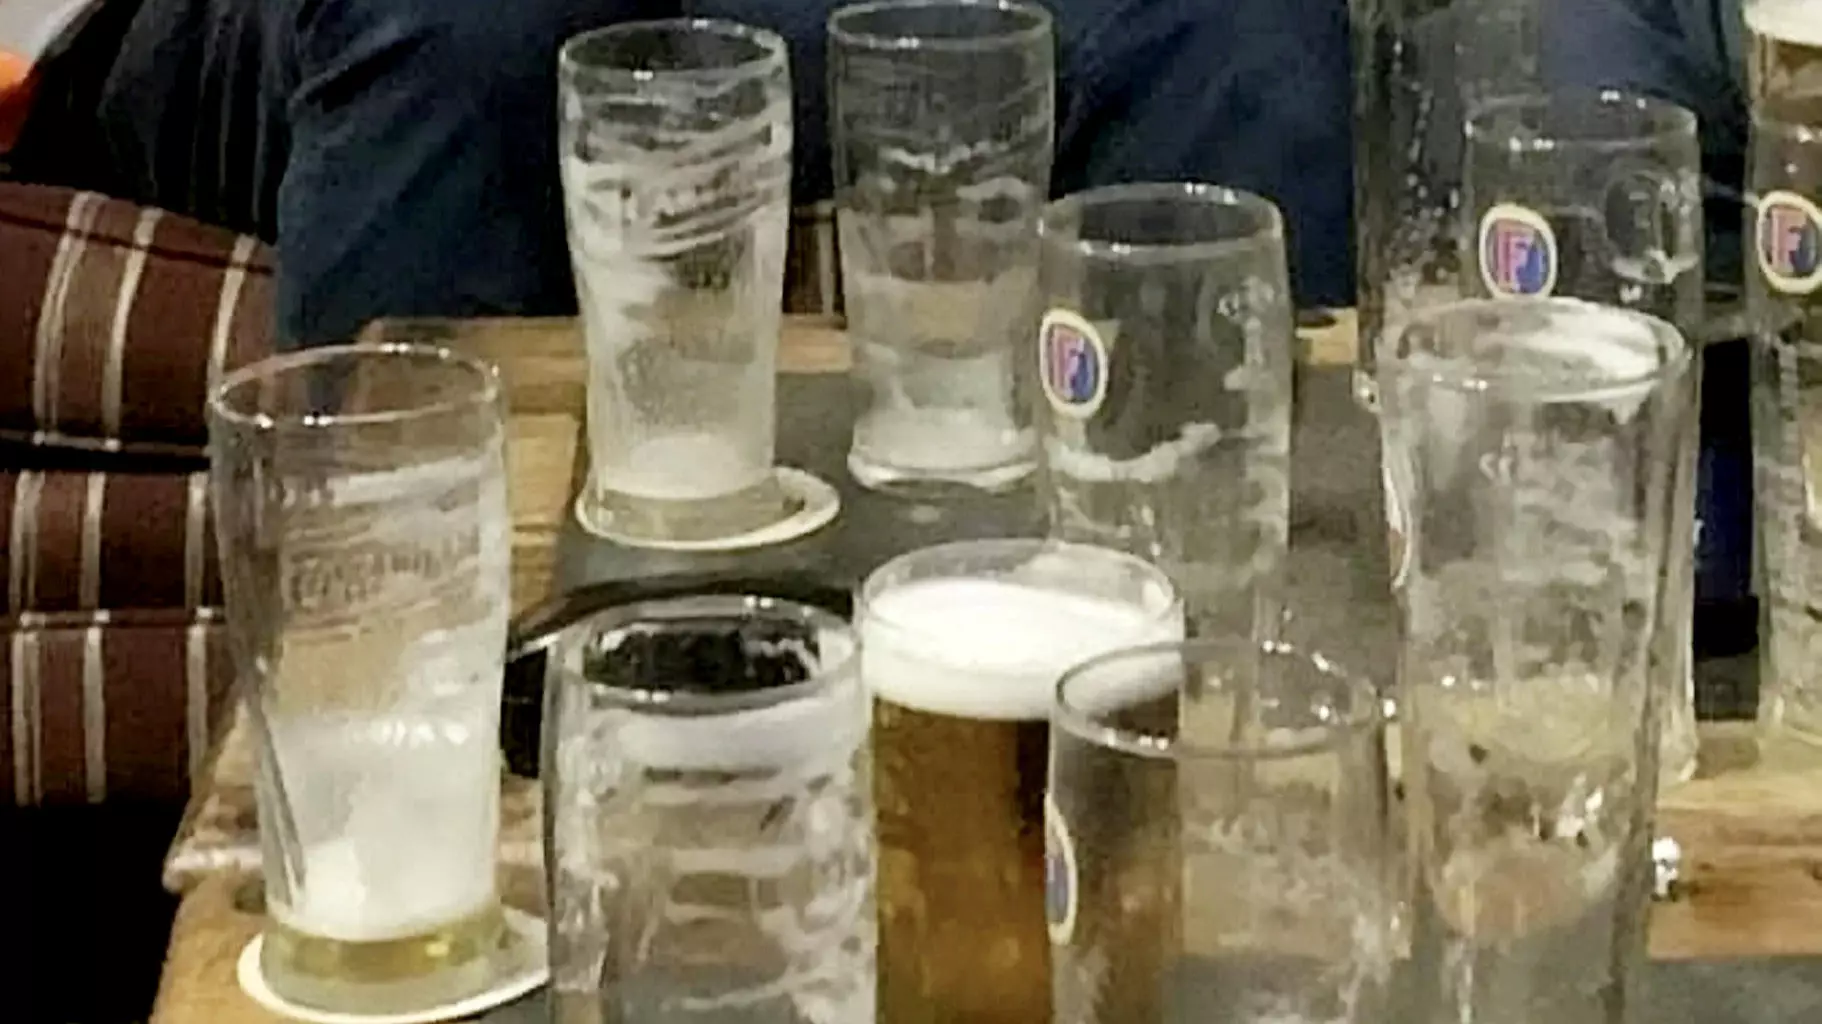 Hotel Loses Its Licence After Drinkers Pose With Pints During Lockdown